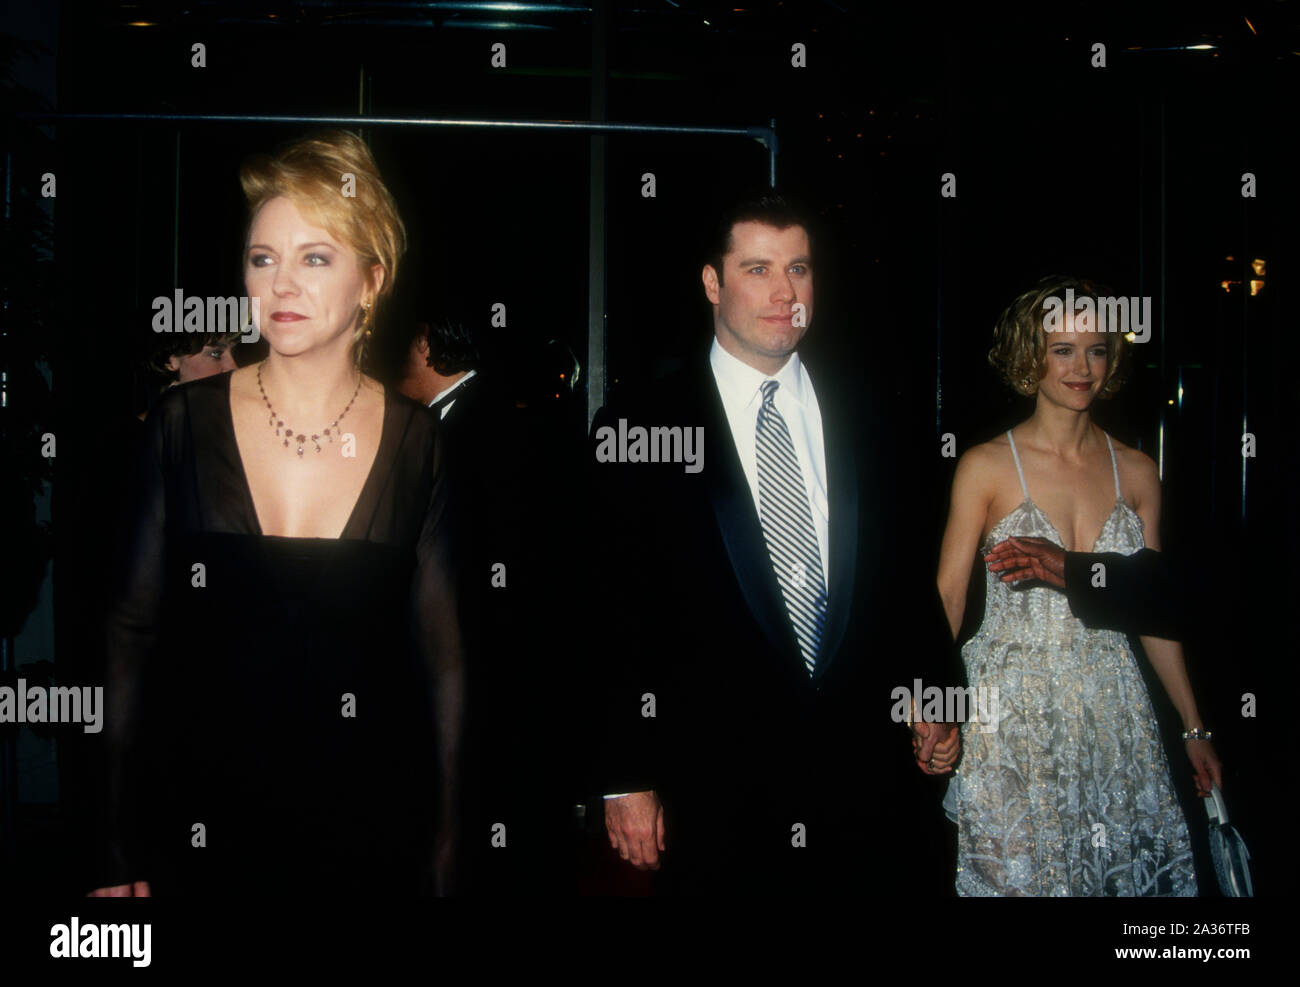 Beverly Hills, California, USA 21st January 1995 Actress Brett Butler, actor John Travolta and actress Kelly Preston attend the 52nd Annual Golden Globe Awards on January 21, 1995 at the Beverly Hilton Hotel in Beverly Hills, California, USA. Photo by Barry King/Alamy Stock Photo Stock Photo